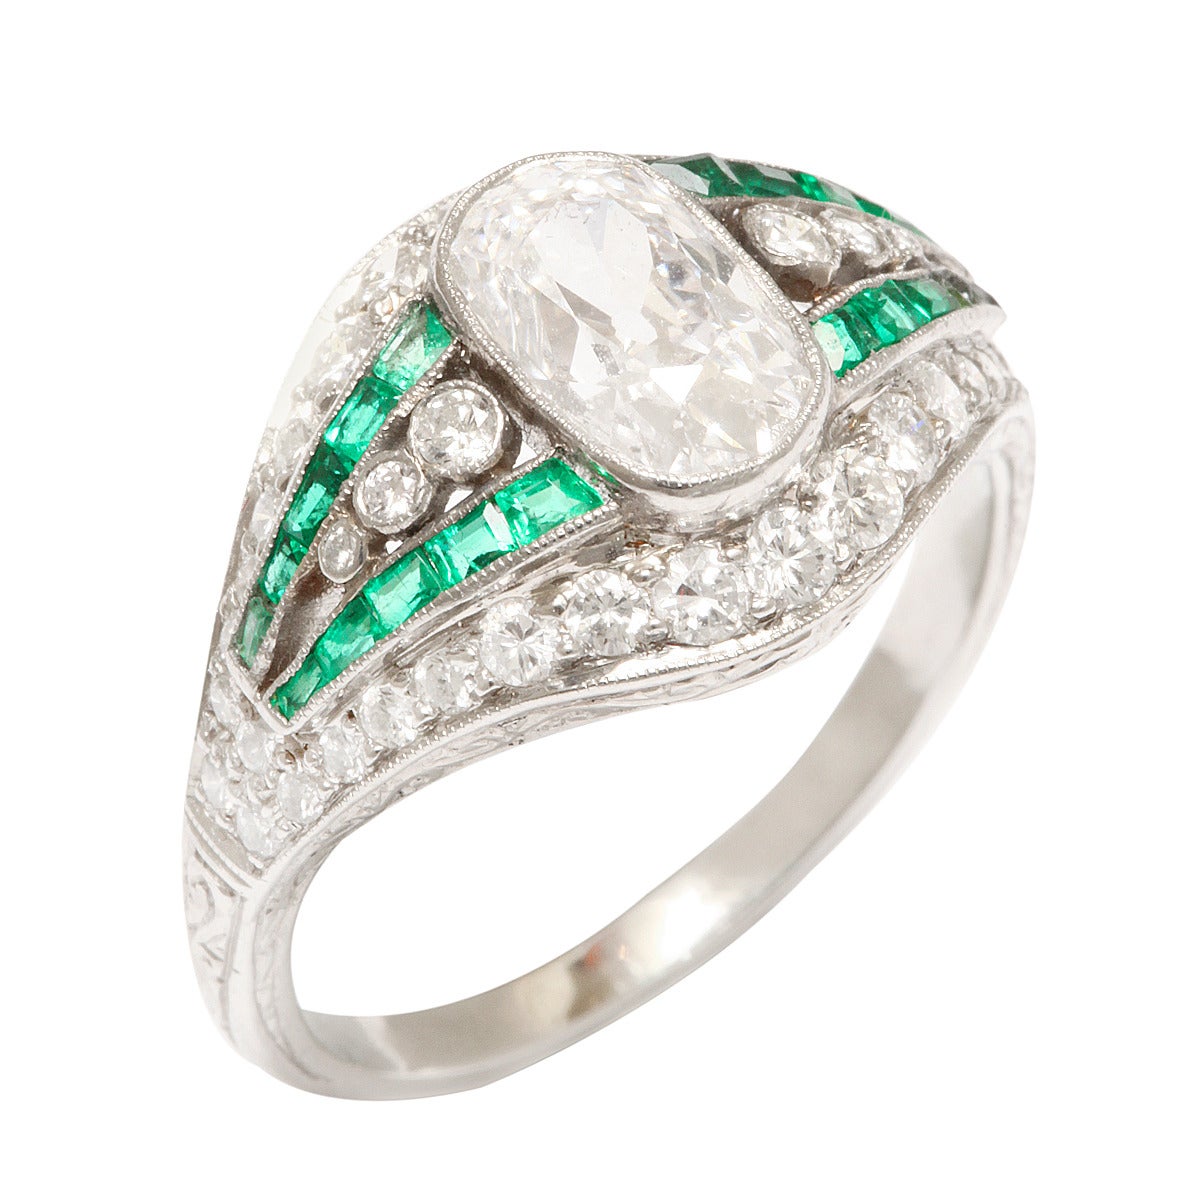 Edwardian-era diamond ring set in platinum, featuring an approximately 1.25 ct central diamond, and with emerald bands.

English, ca. 1915